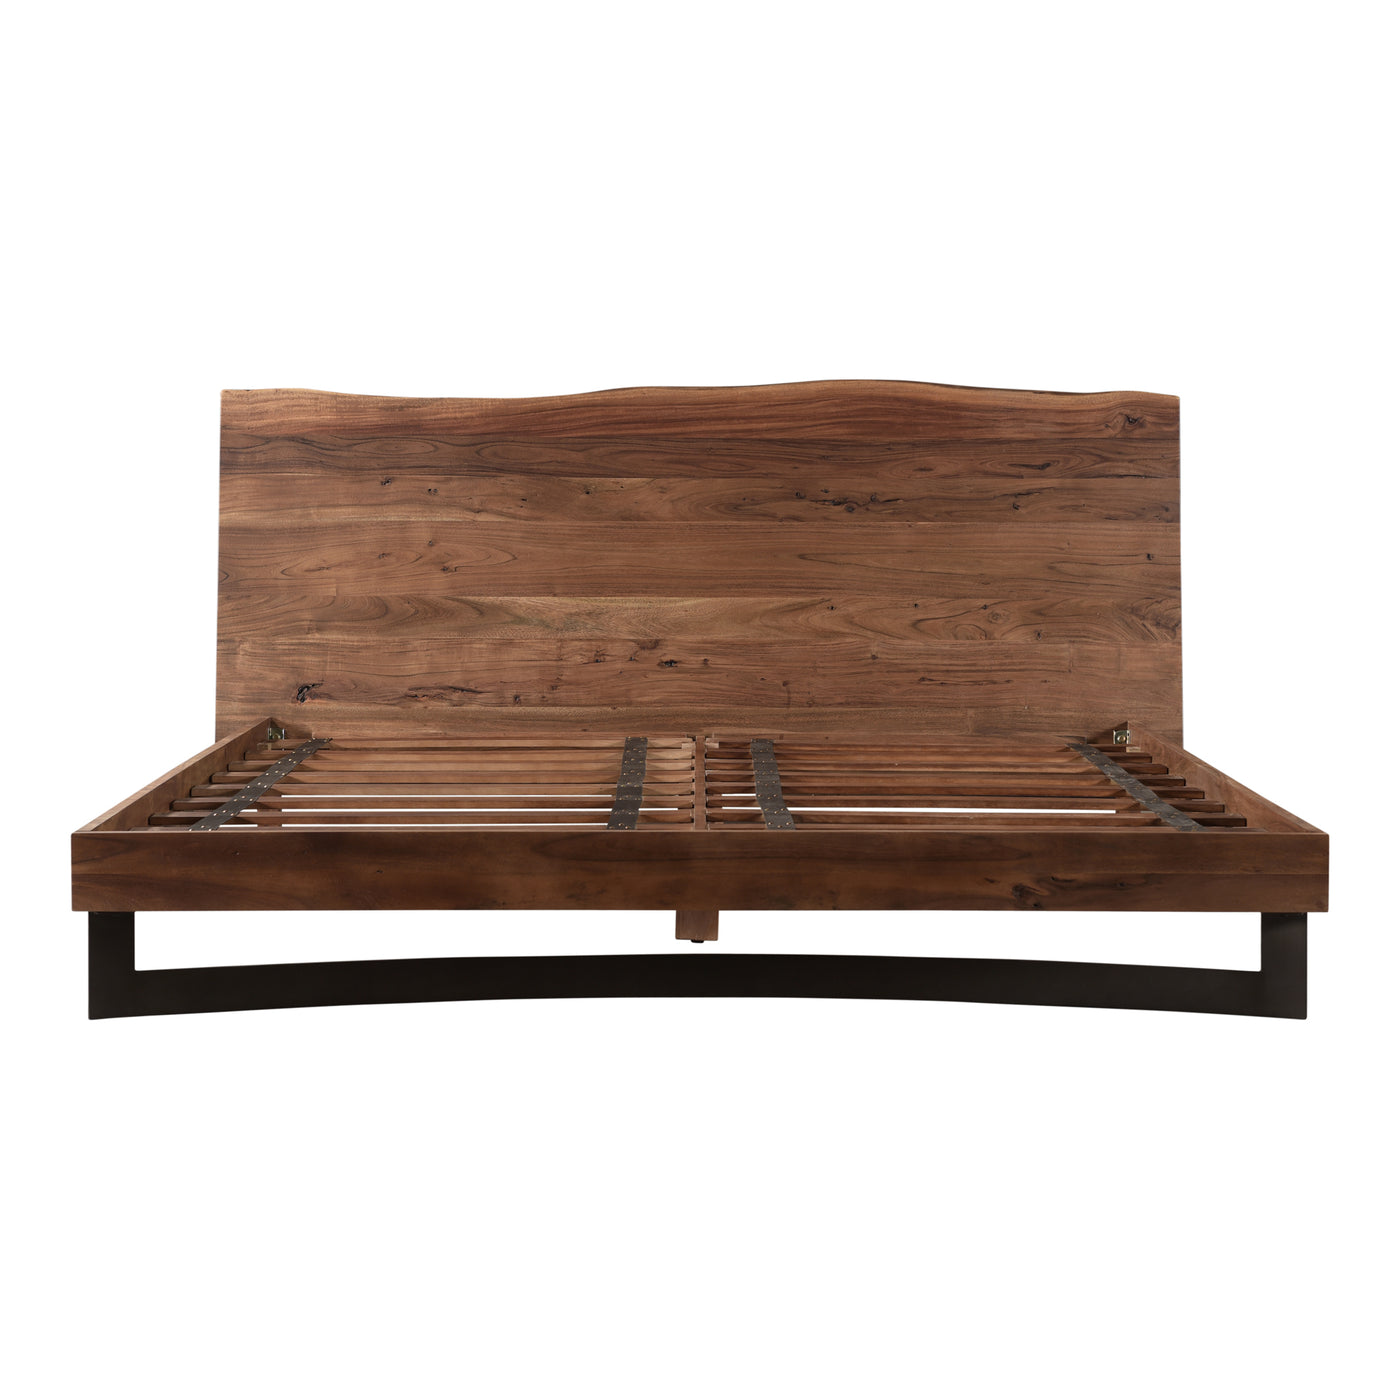 The Bent collection puts natures craft front and center. Made of beautiful solid acacia wood, rustic live edge detailing ...